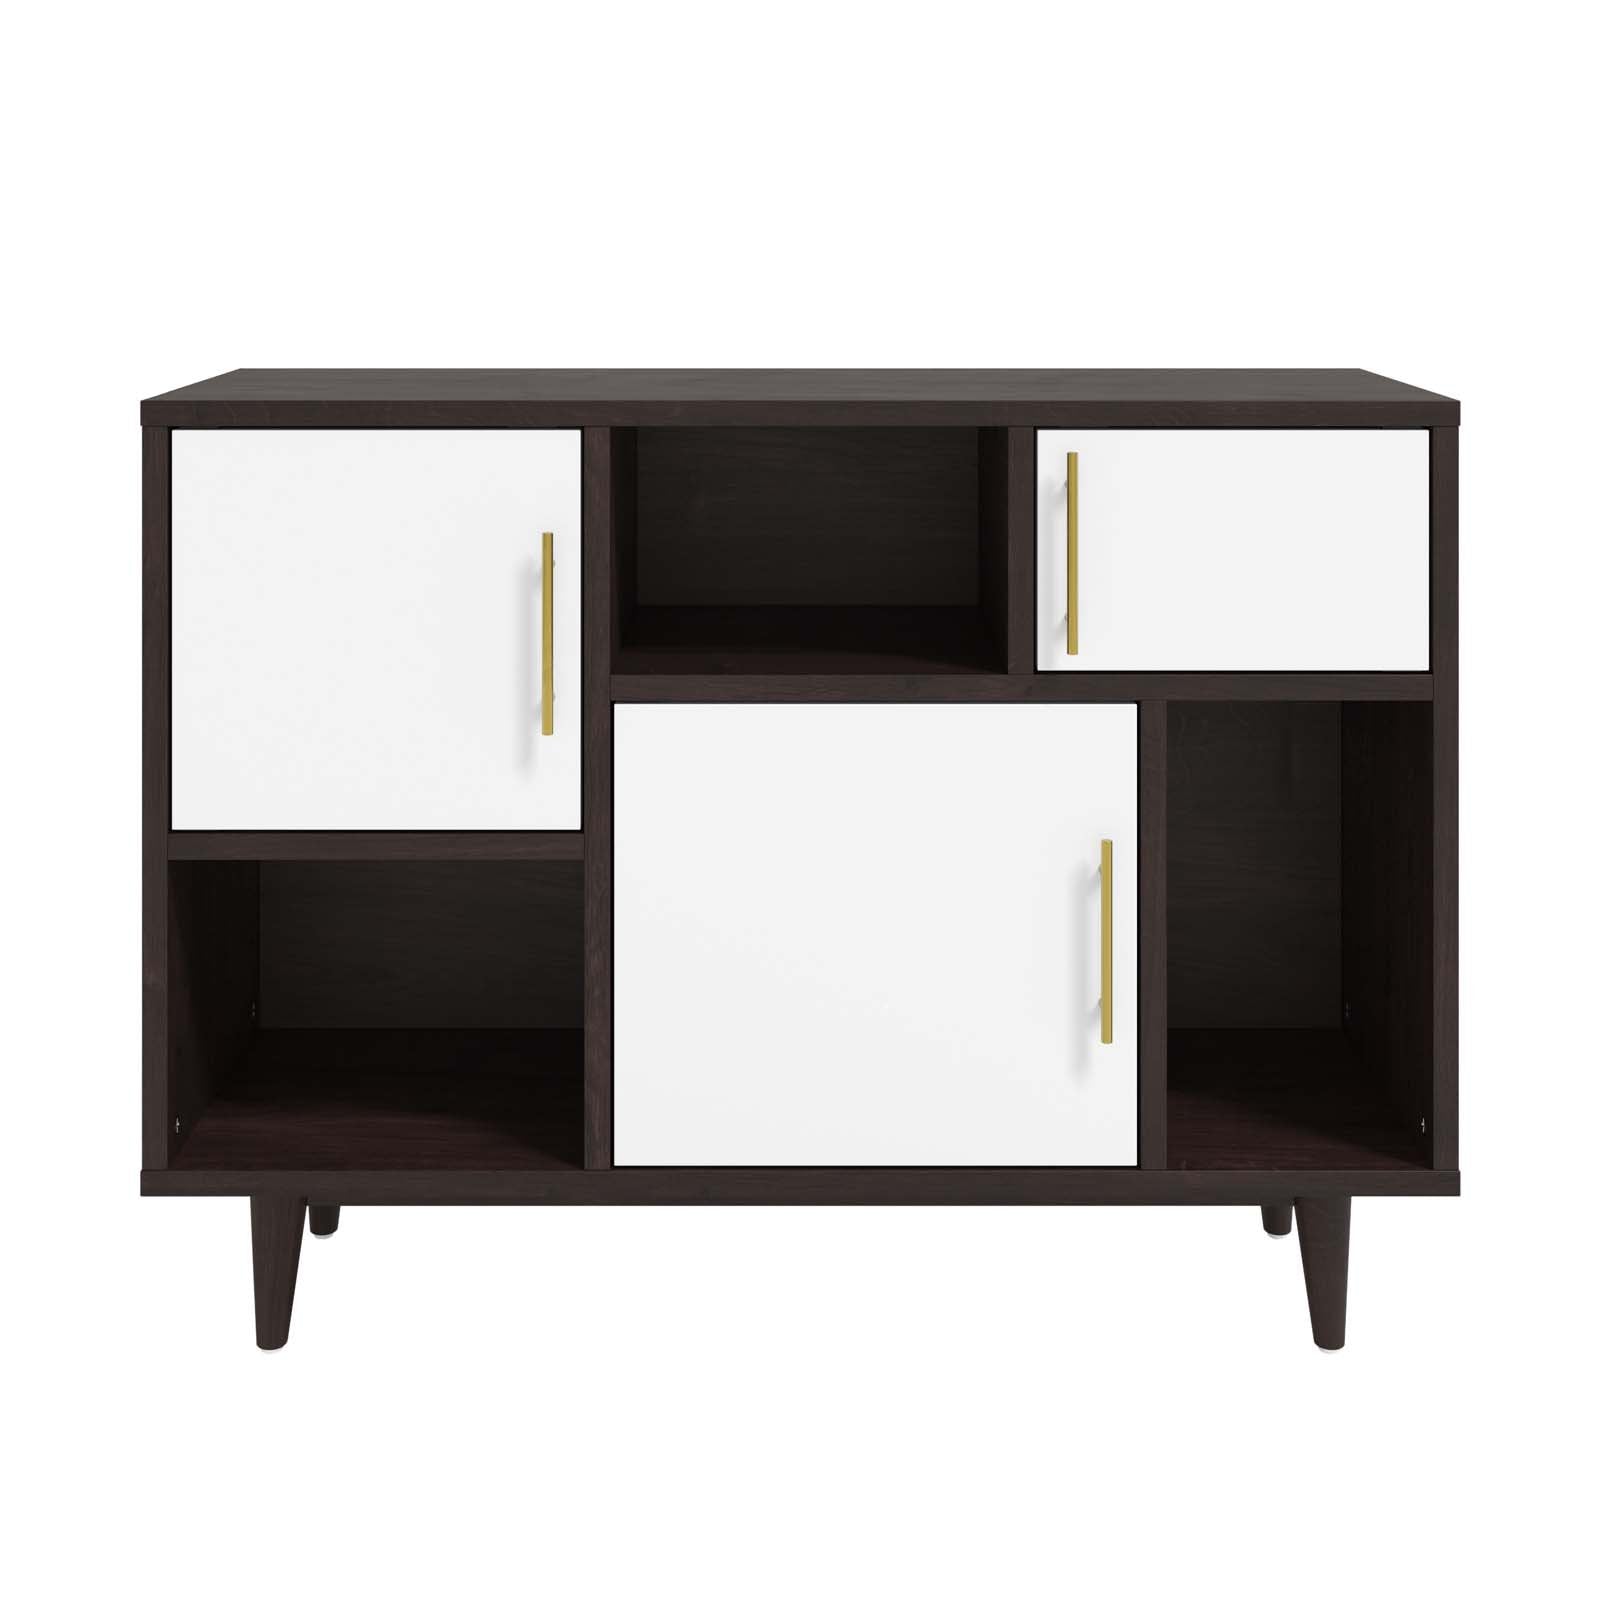 Daxton Display Stand - East Shore Modern Home Furnishings